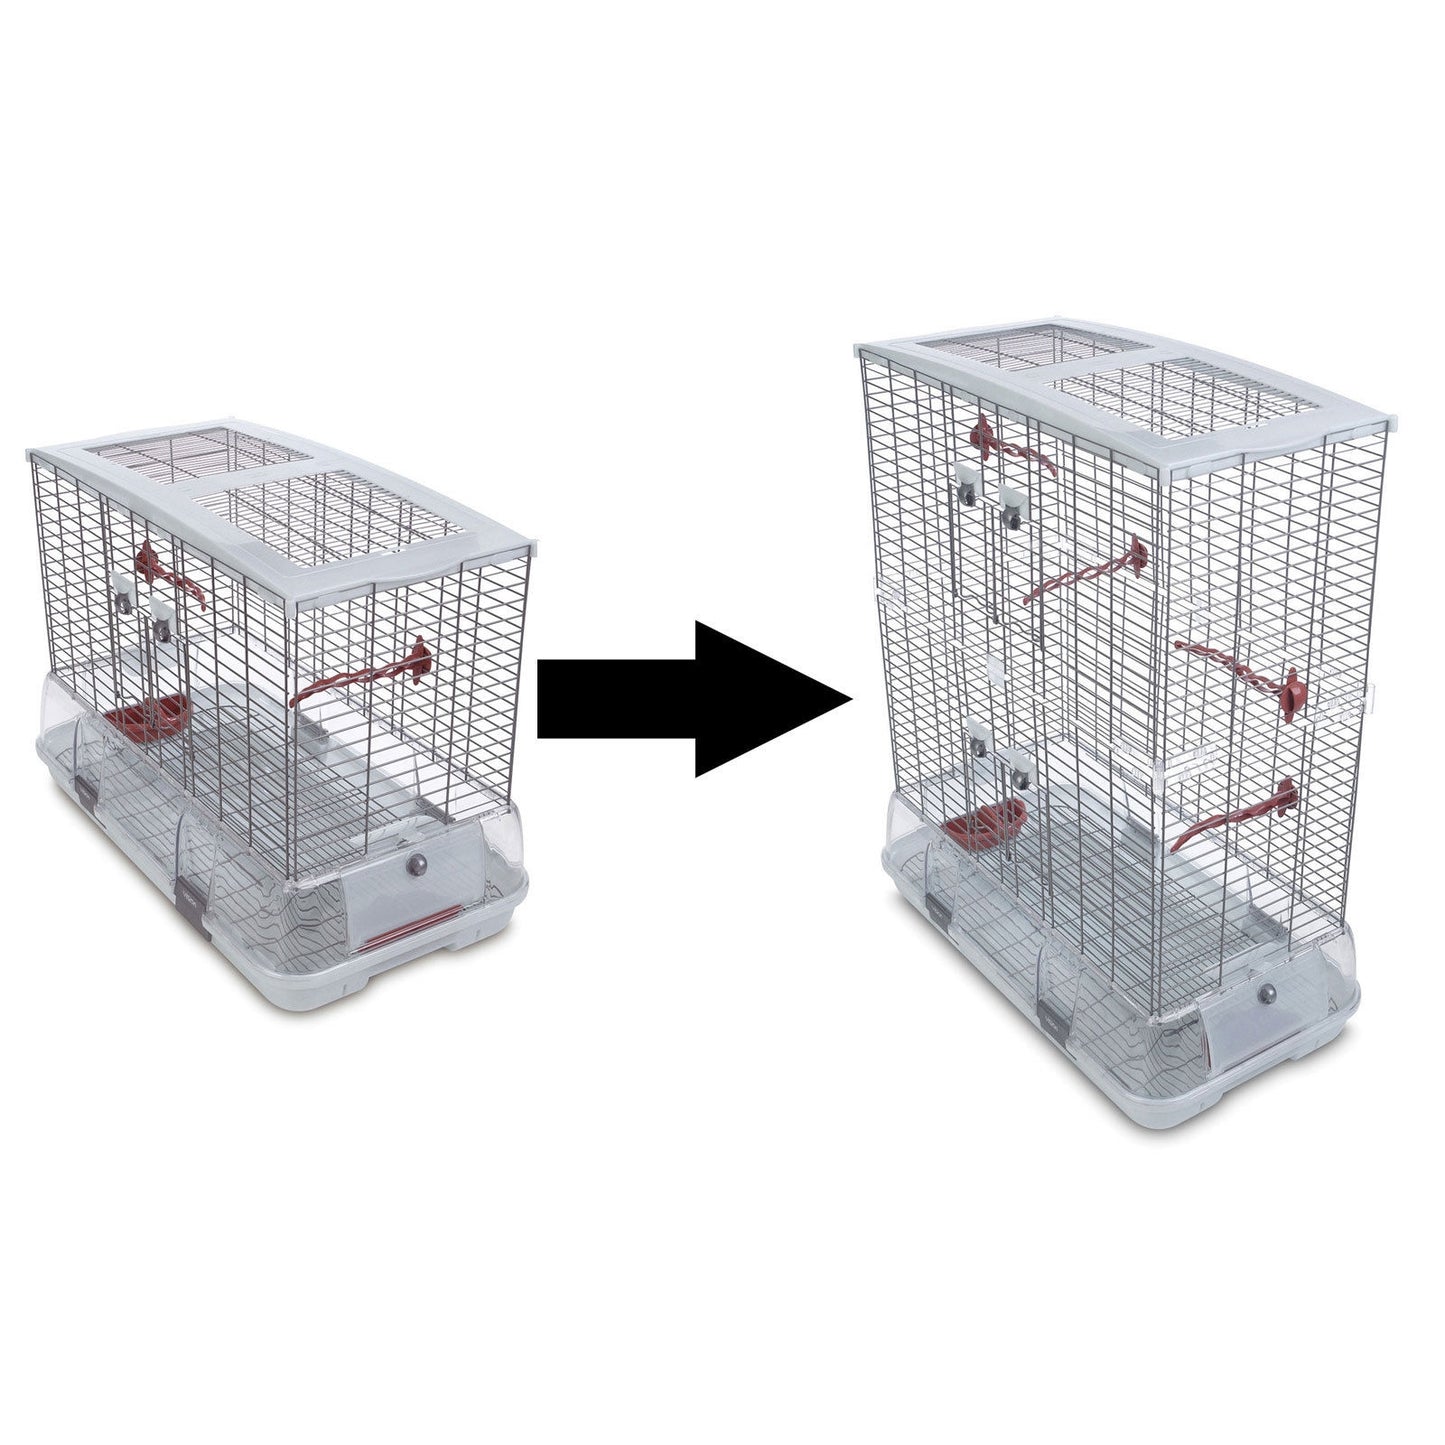 Vision Cage Extension Kits - Converts Small Regular Cage to Small Tall Cage